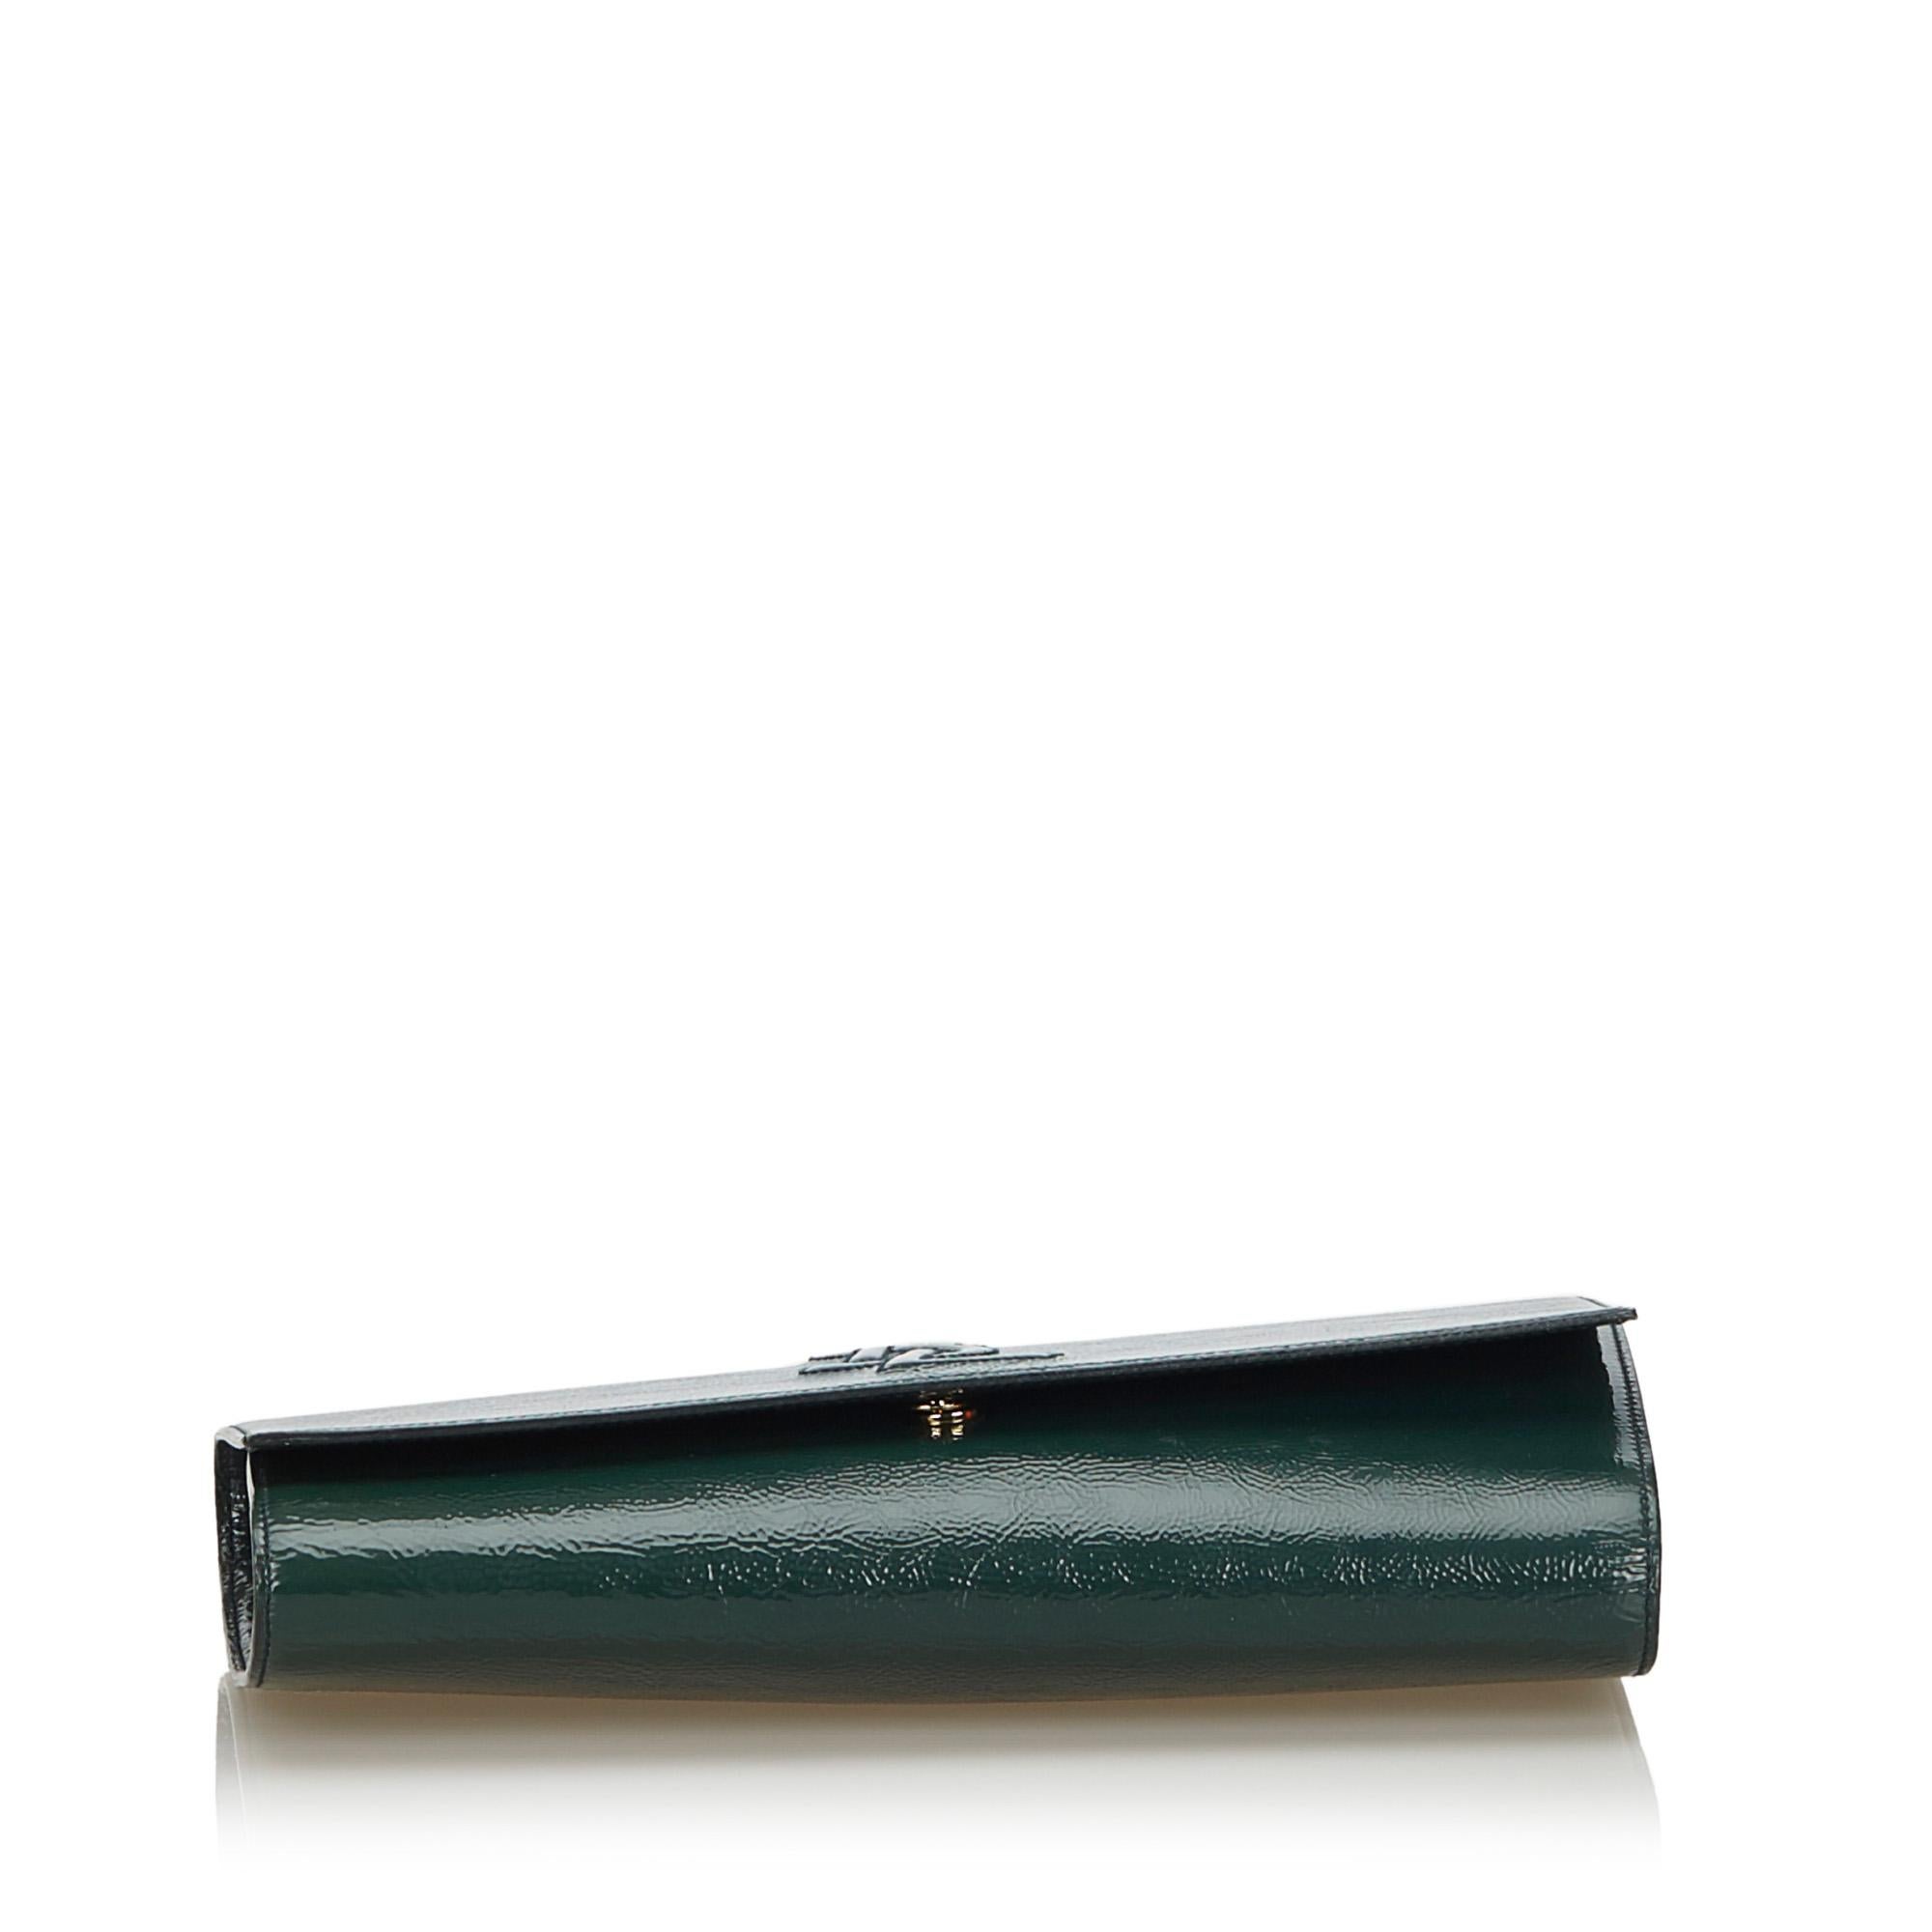 Vintage Authentic YSL Green Belle du Jour Clutch France w Dust Bag SMALL  In Good Condition For Sale In Orlando, FL